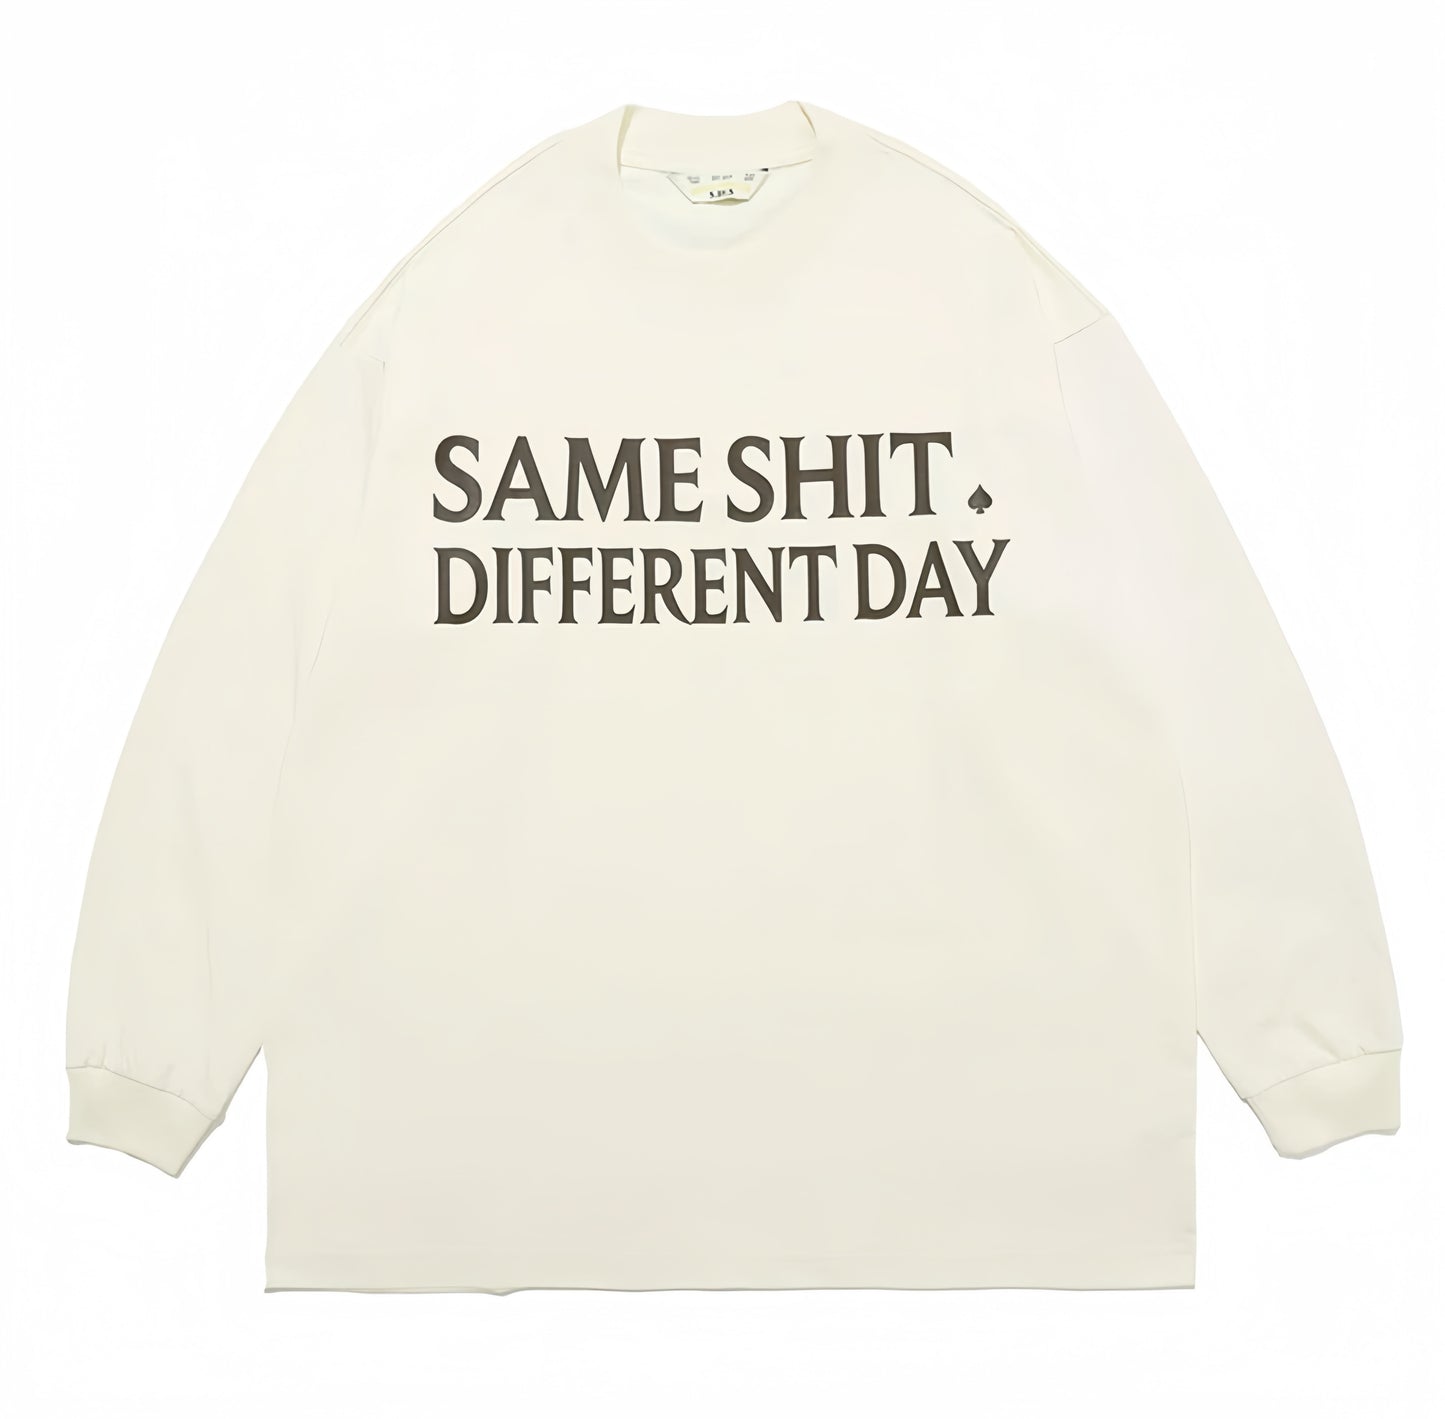 SAME SHIT DIFFERENT DAY